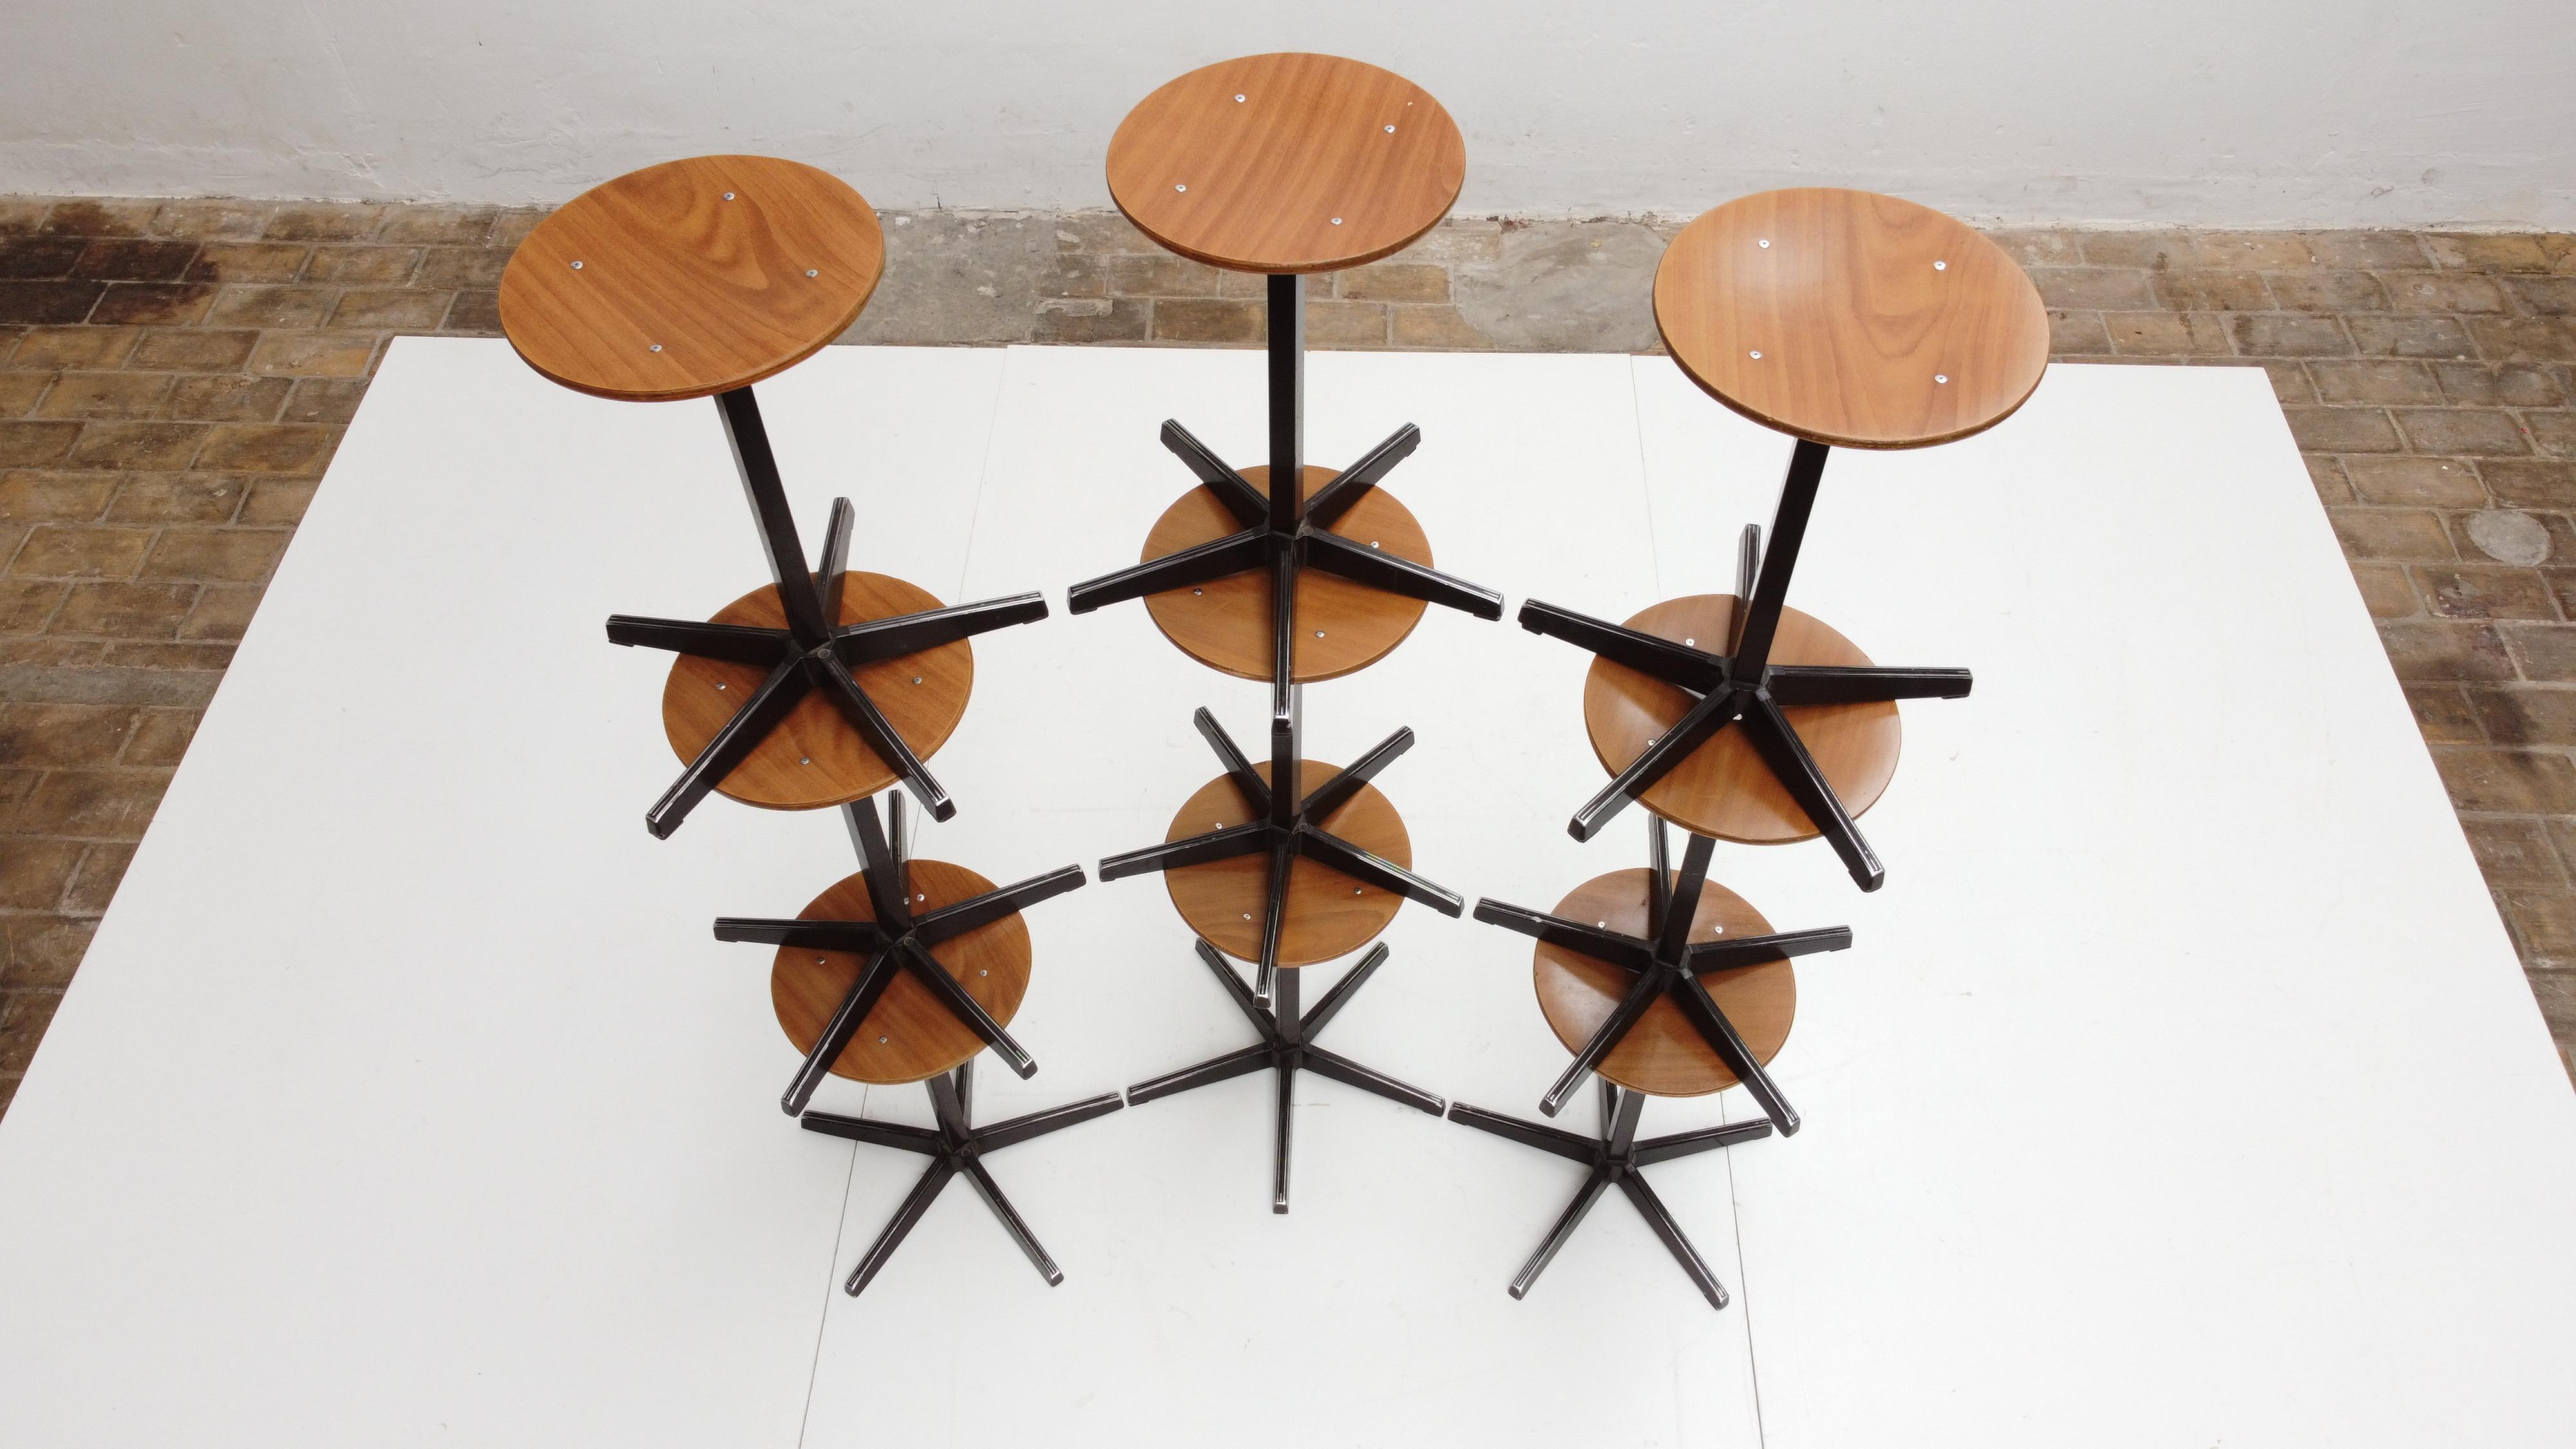 Cast Set of 9 Sturdy Industrial Stools by Dutch Manufacturer Galvanitas, 1970's